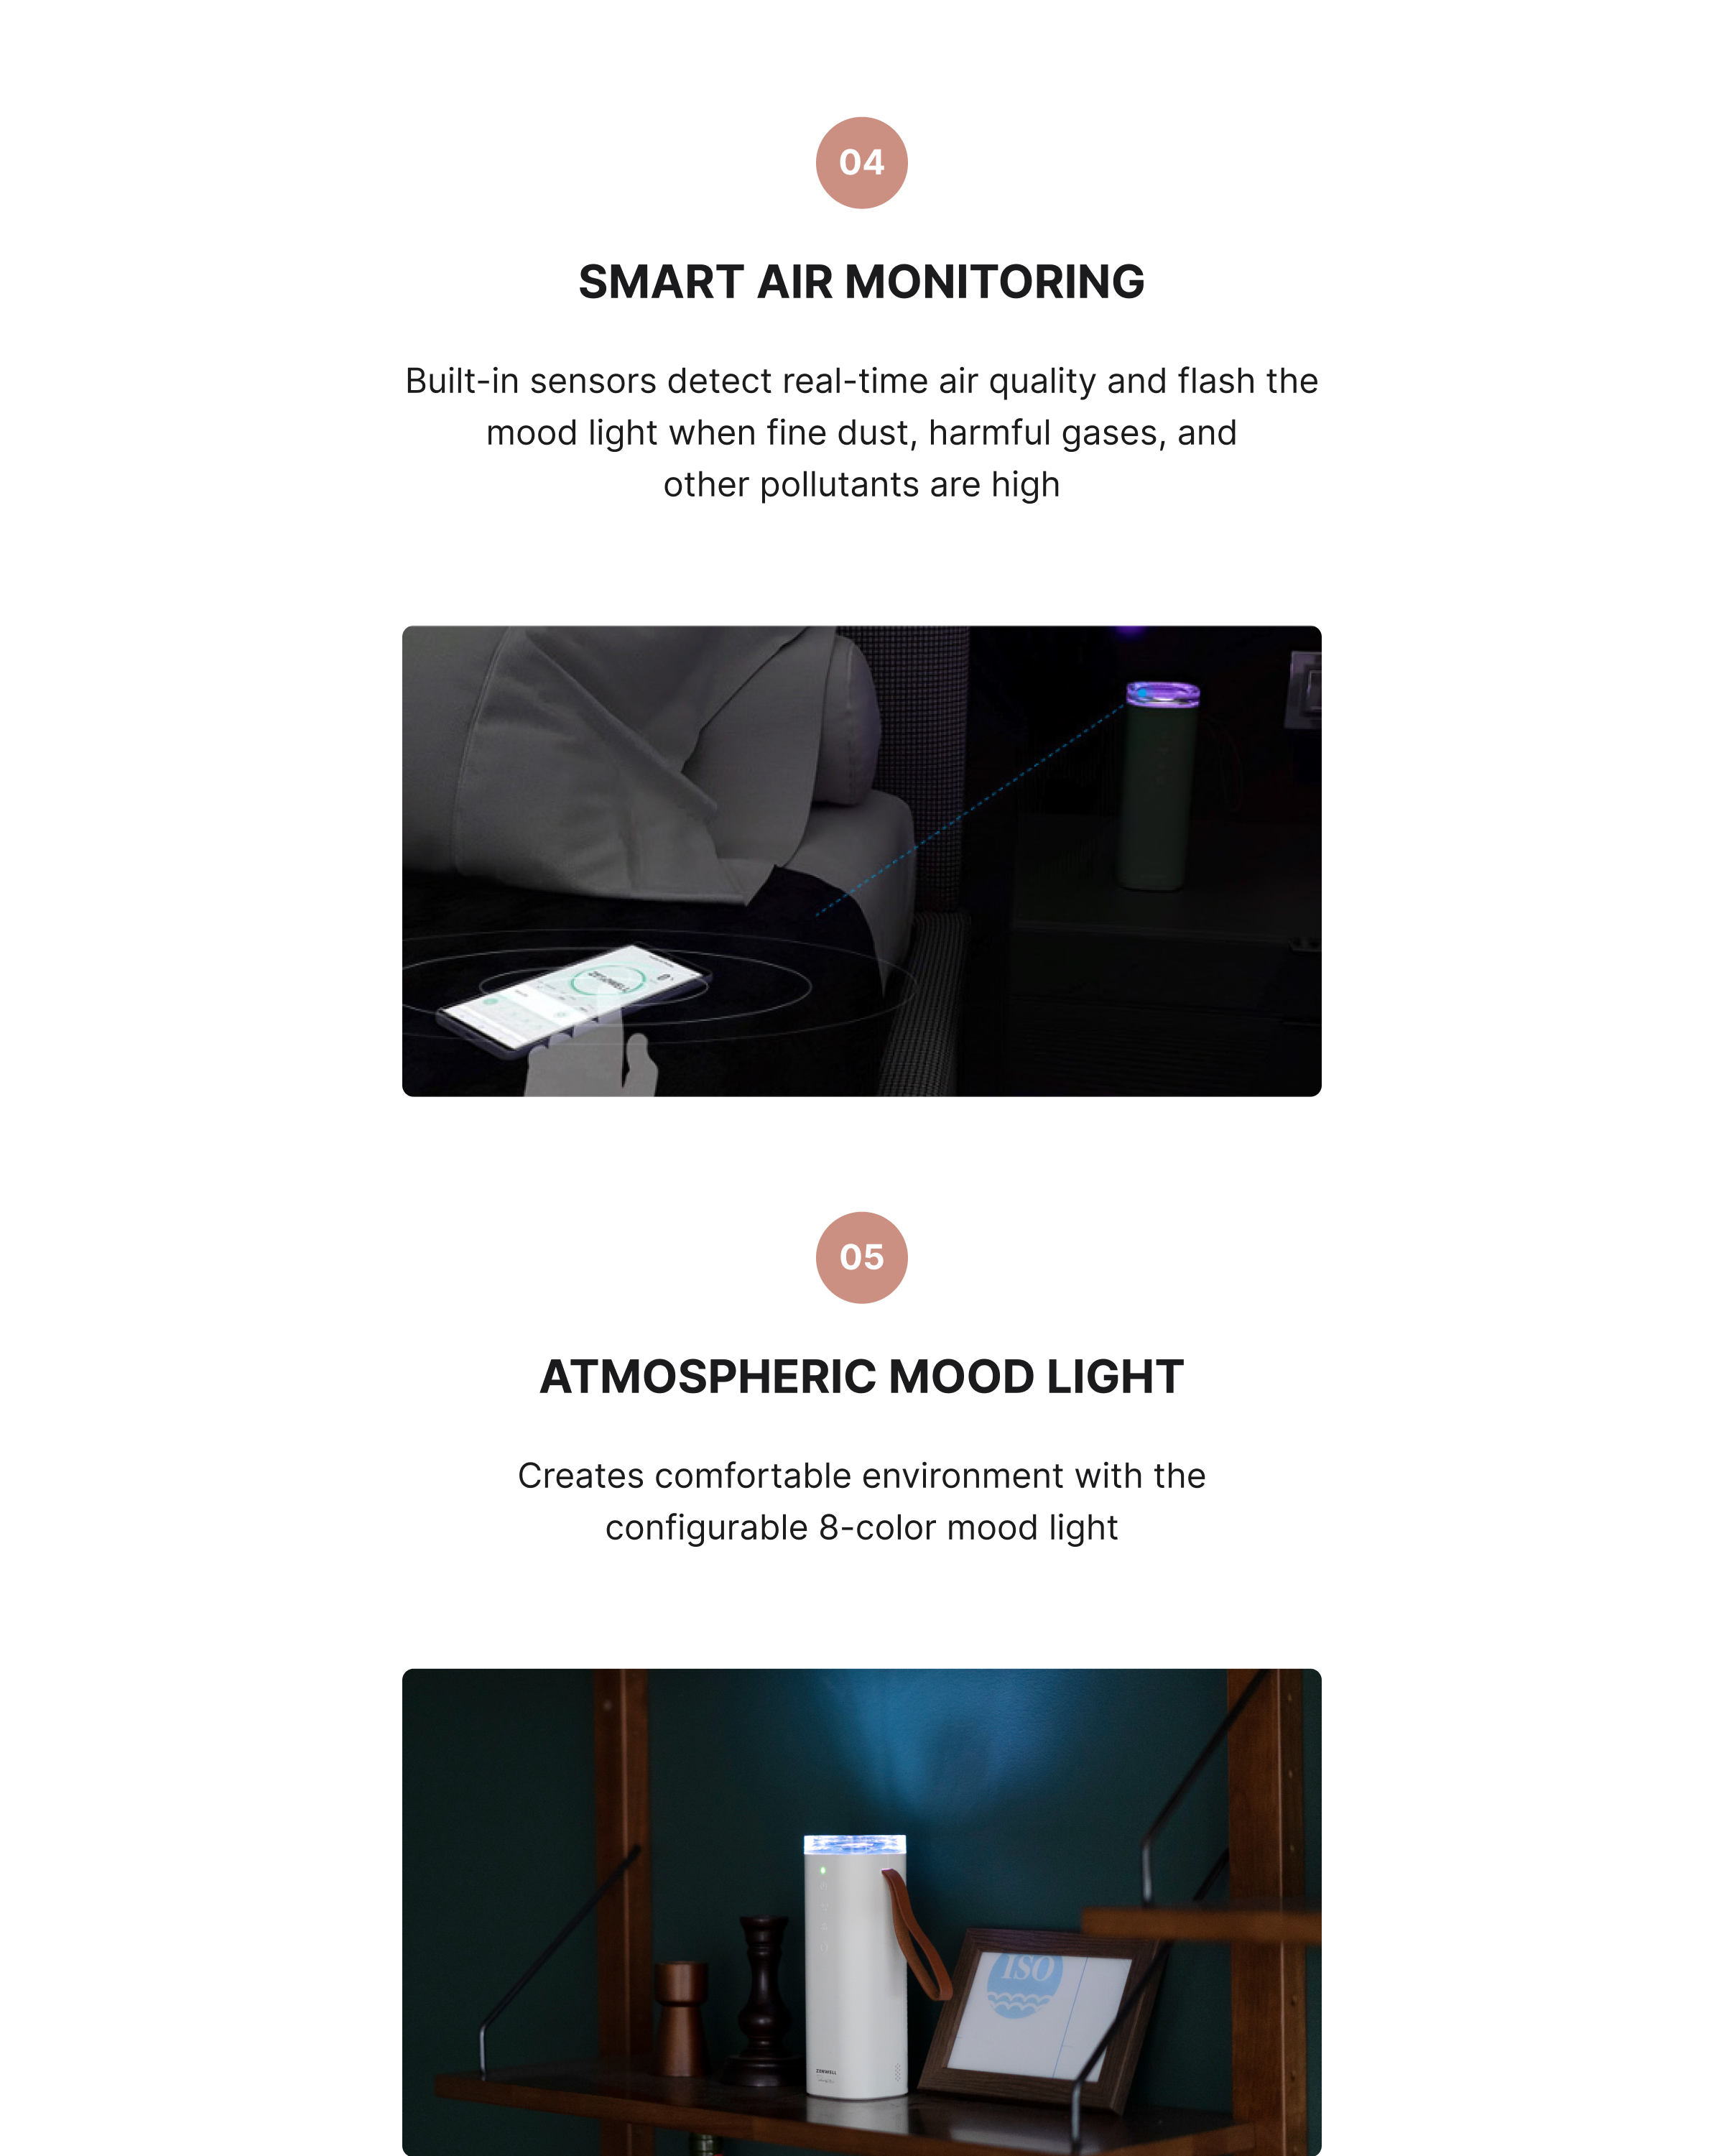 Baby Safe Air Doctor product description image describing how the smart air monitoring uses built-in sensors to detect air quality real-time and flashes the mood light when levels of dust, harmful gases, and other pollutants are high and how the mood light comes with 8 color settings